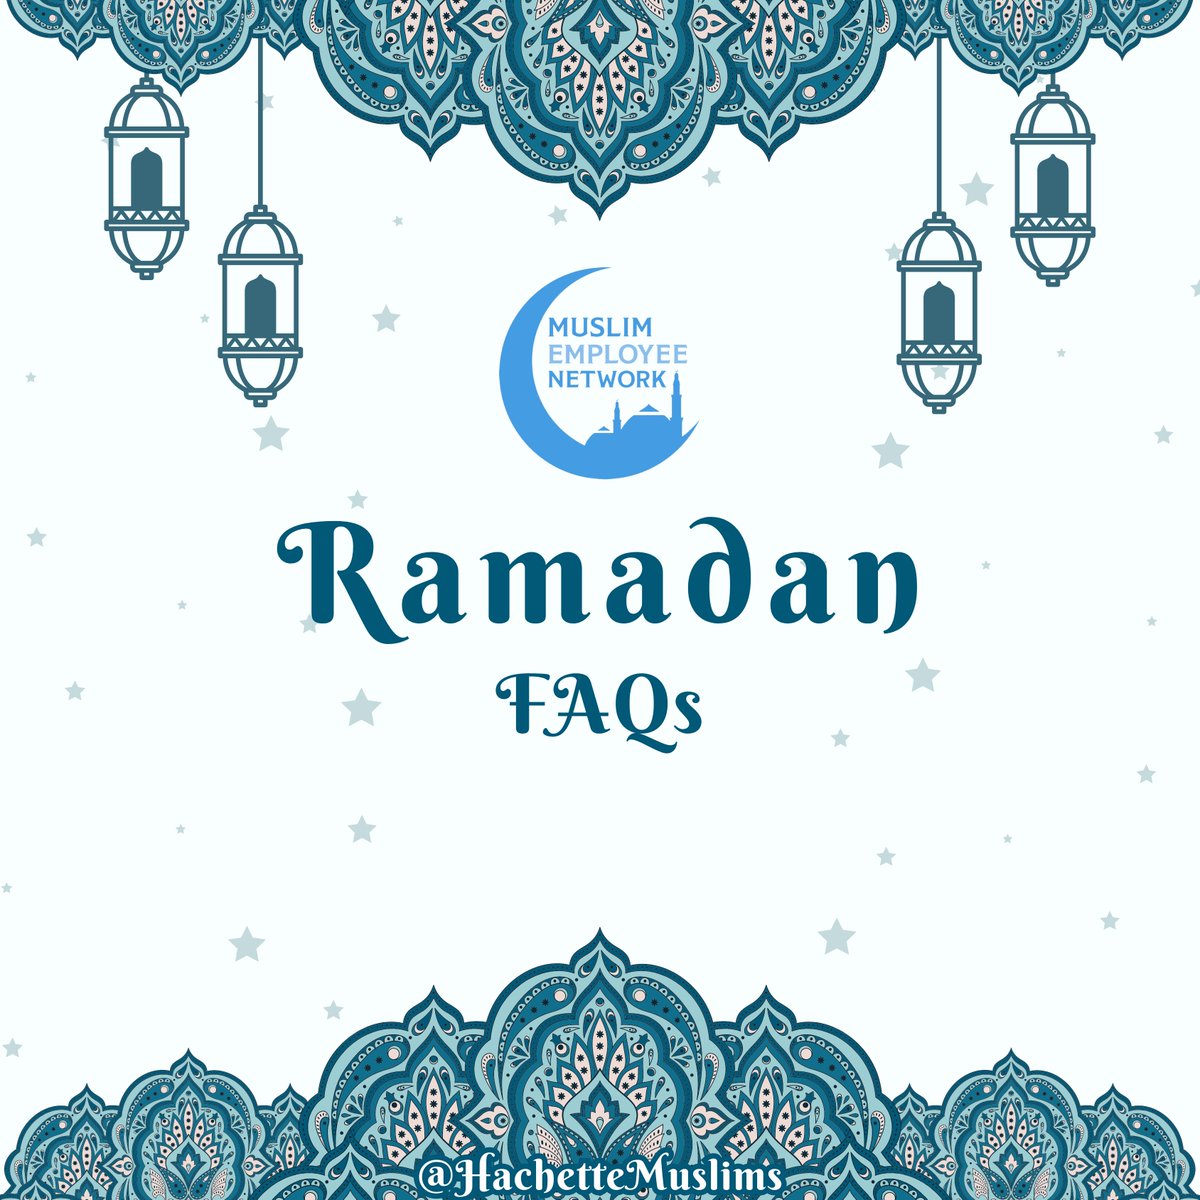 Ramadan Mubarak! Have you seen our Ramadan FAQs so you can better support Muslim colleagues this month? instagram.com/p/C4adnFmNZ8u/…